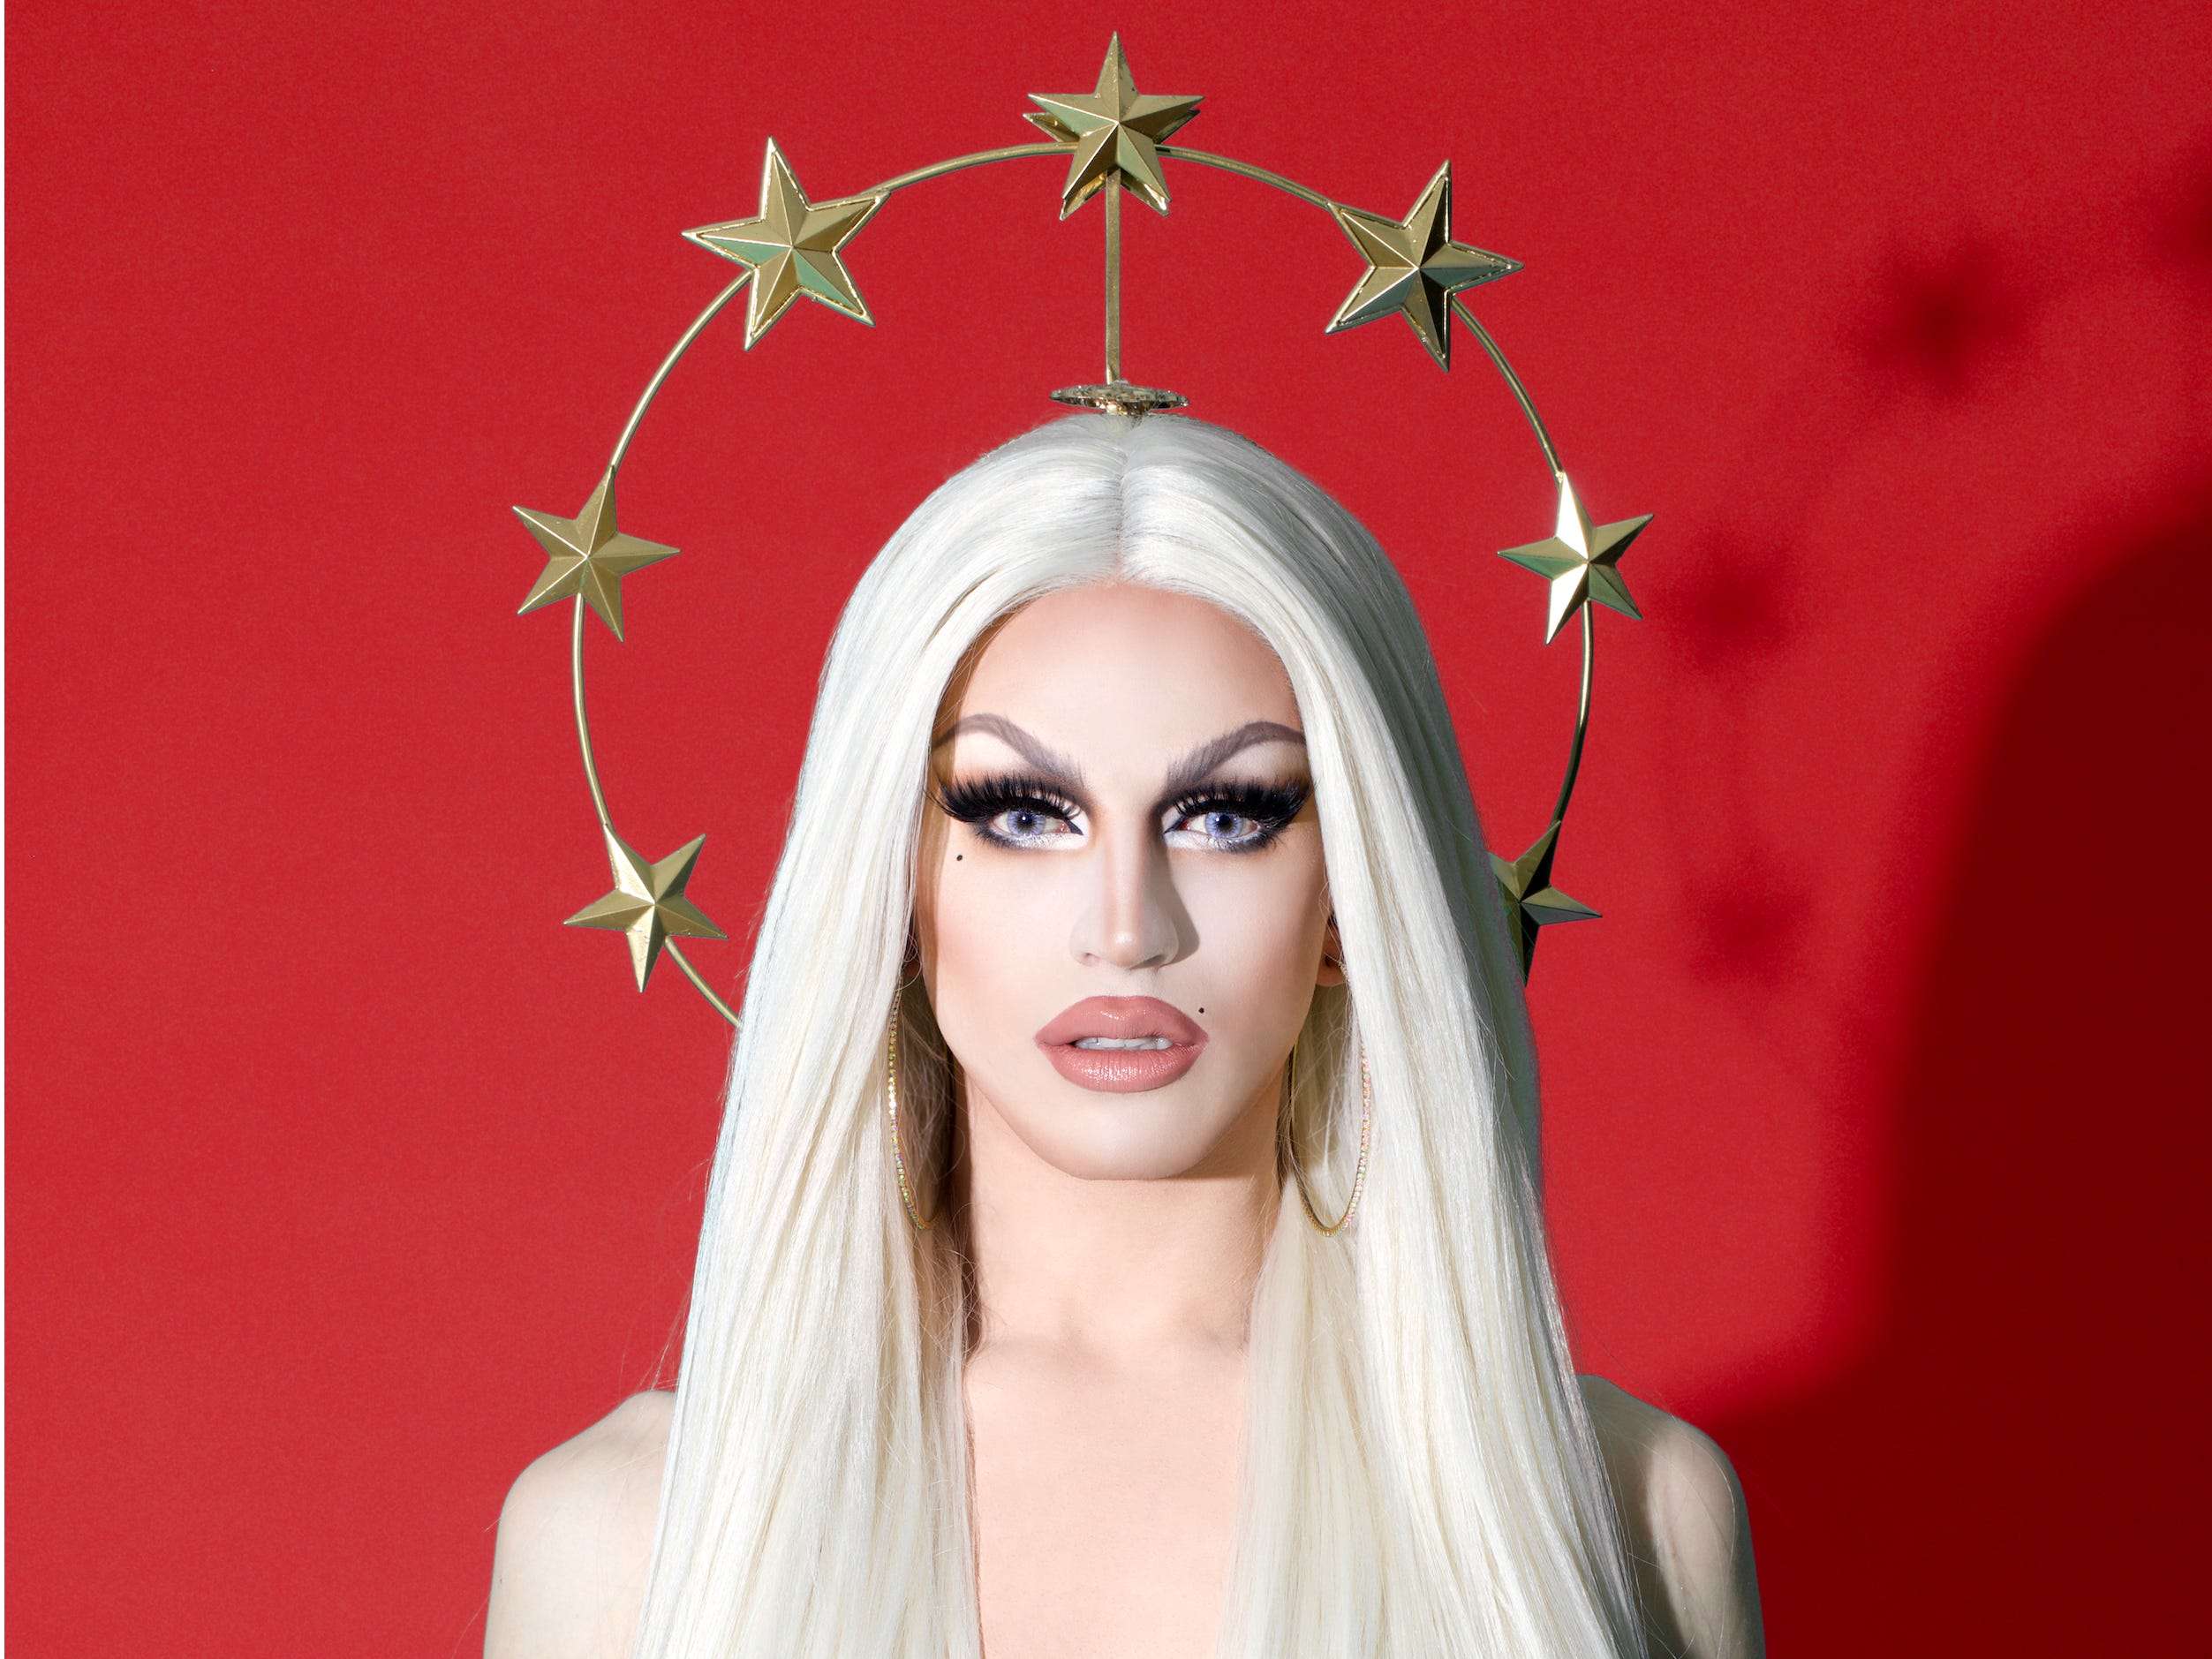 The youngest ever winner of 'RuPaul's Drag Race' tells us how drag has